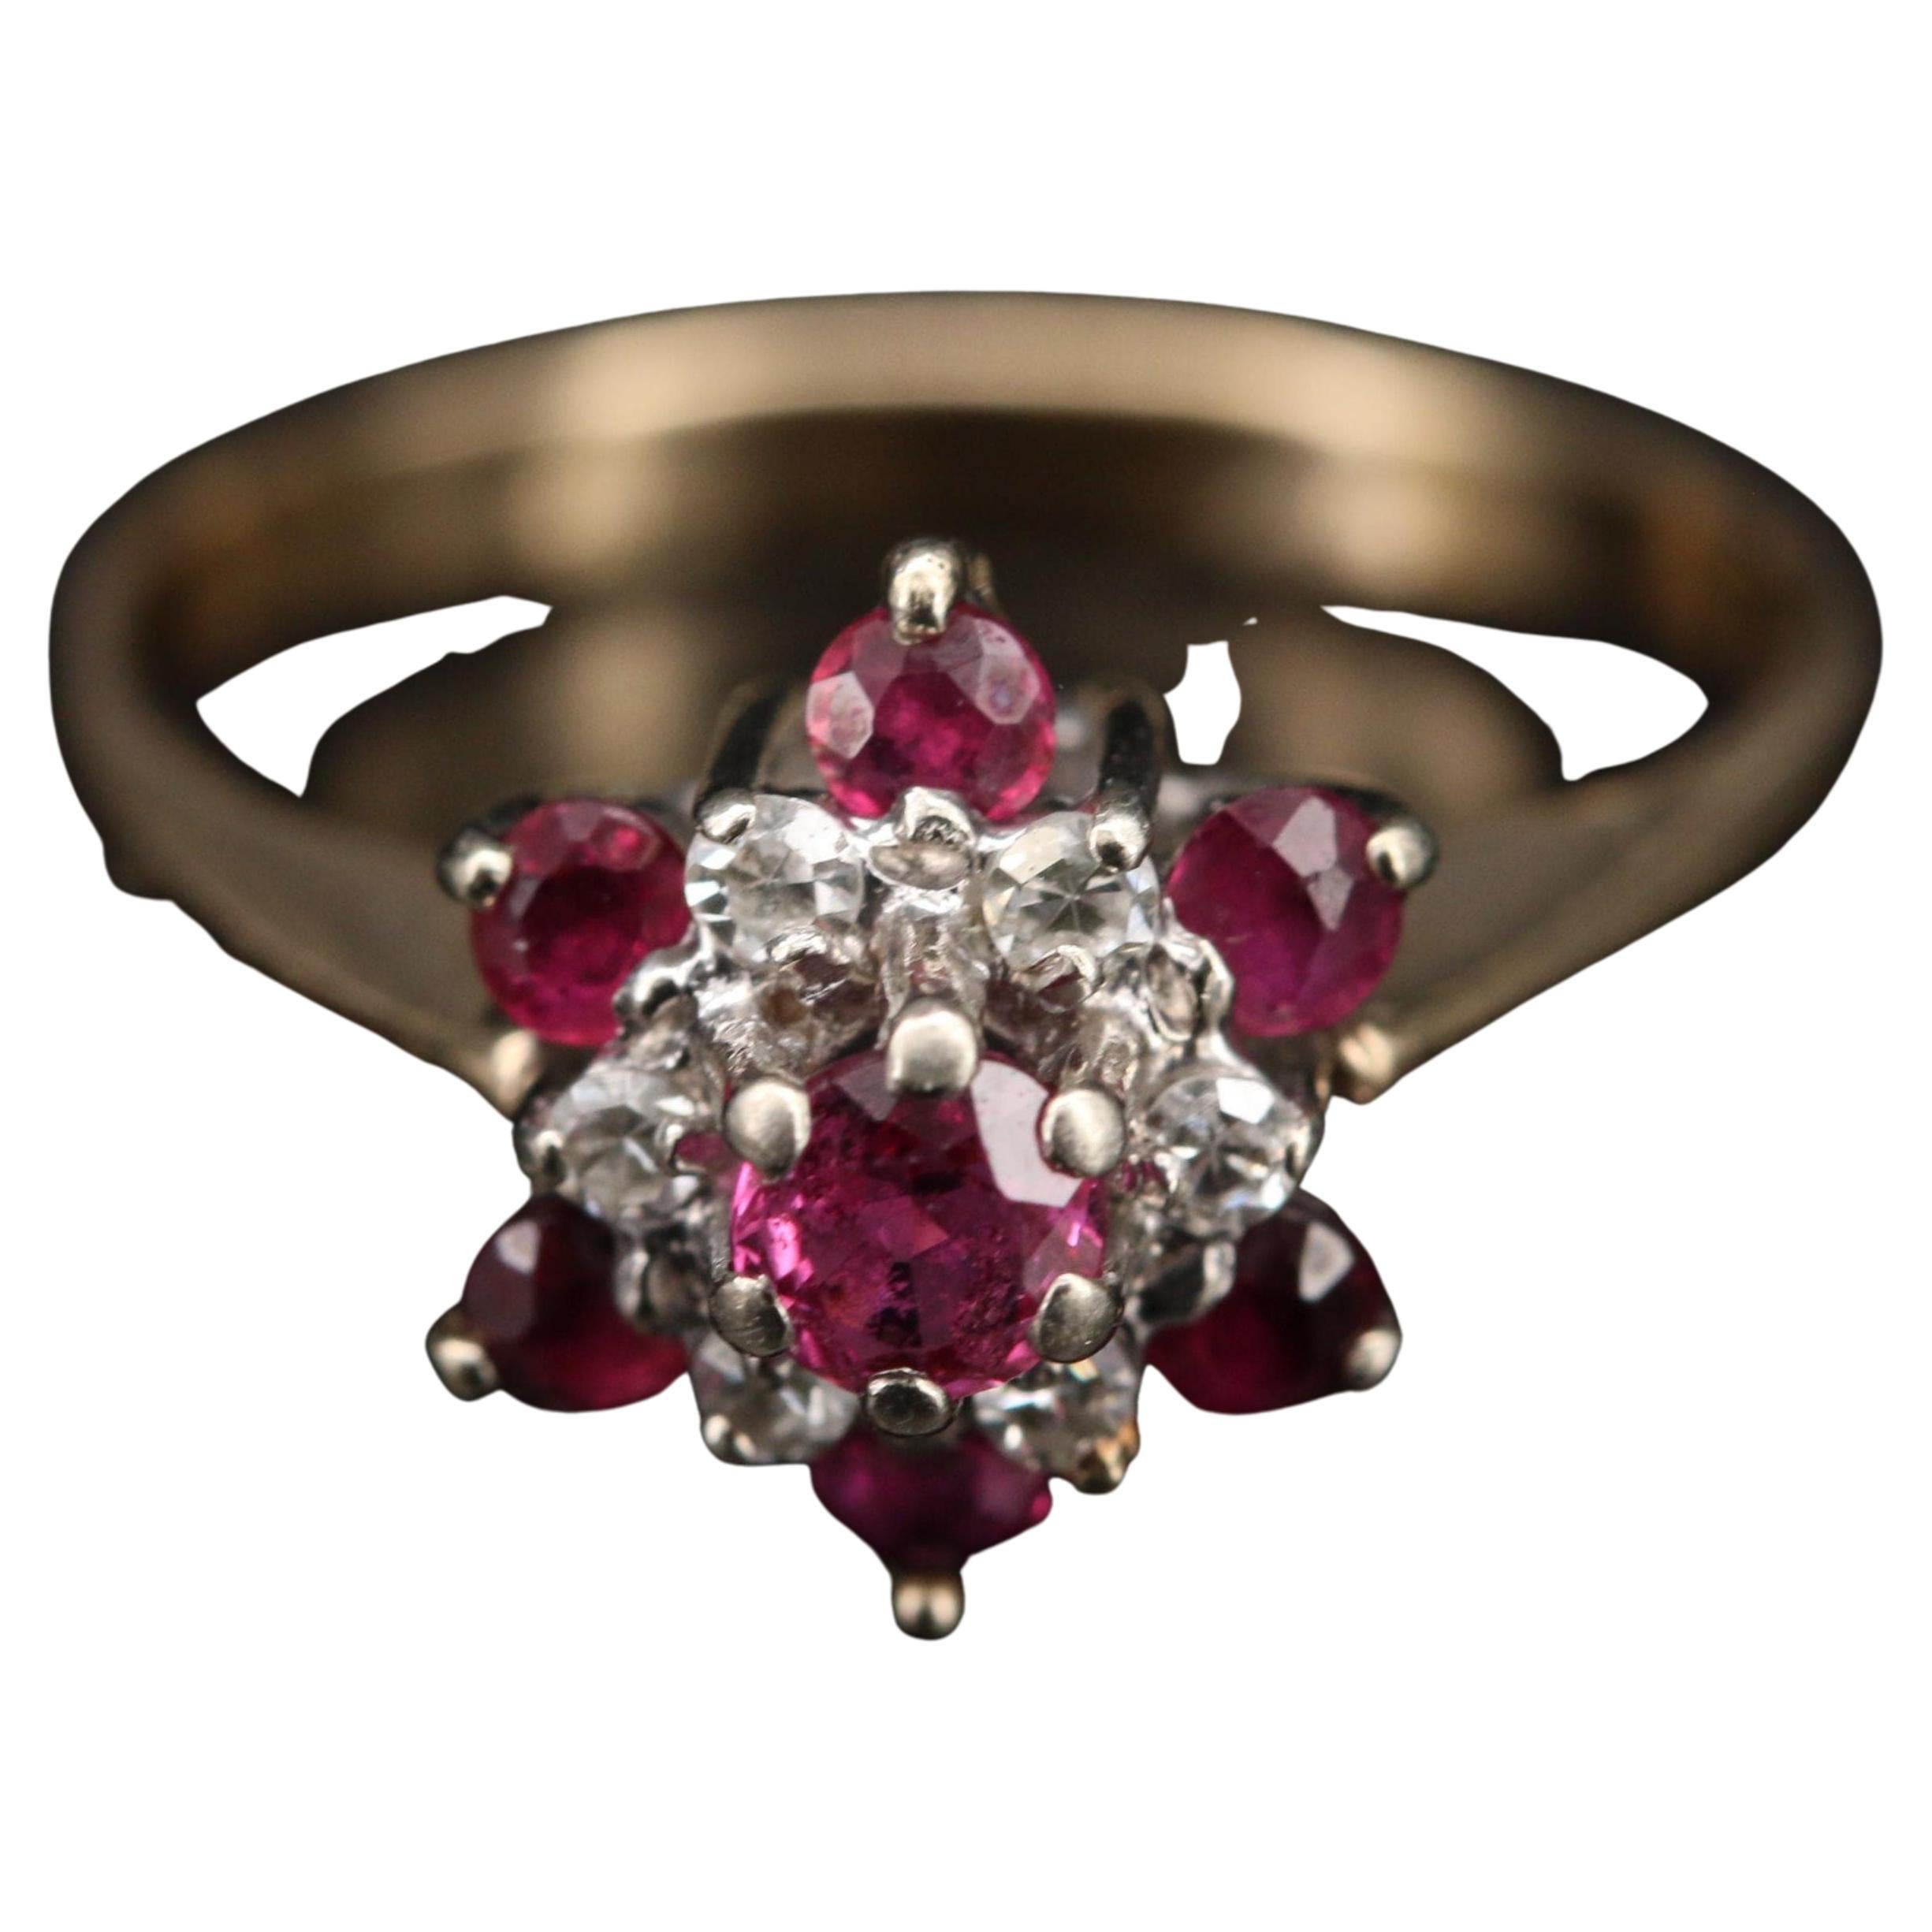 For Sale:  Antique Star Ruby Engagement Ring, Art Deco Floral Ruby Diamond Wedding Ring